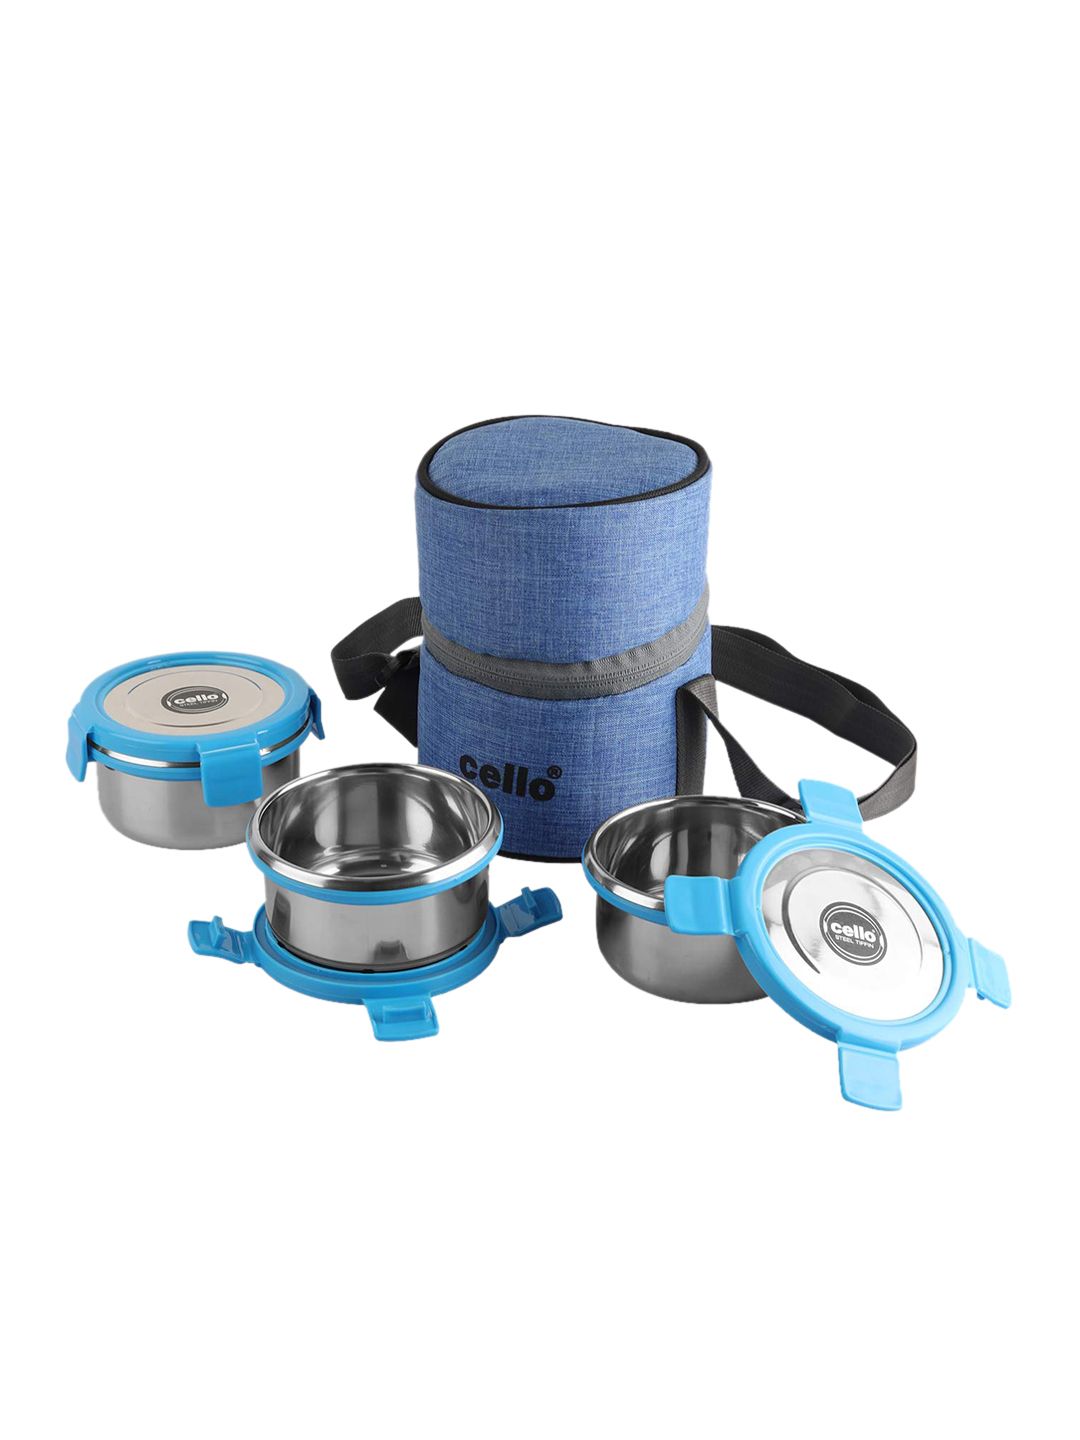 Cello Blue Solid Stainless Steel 3Pc Lunch Box Price in India